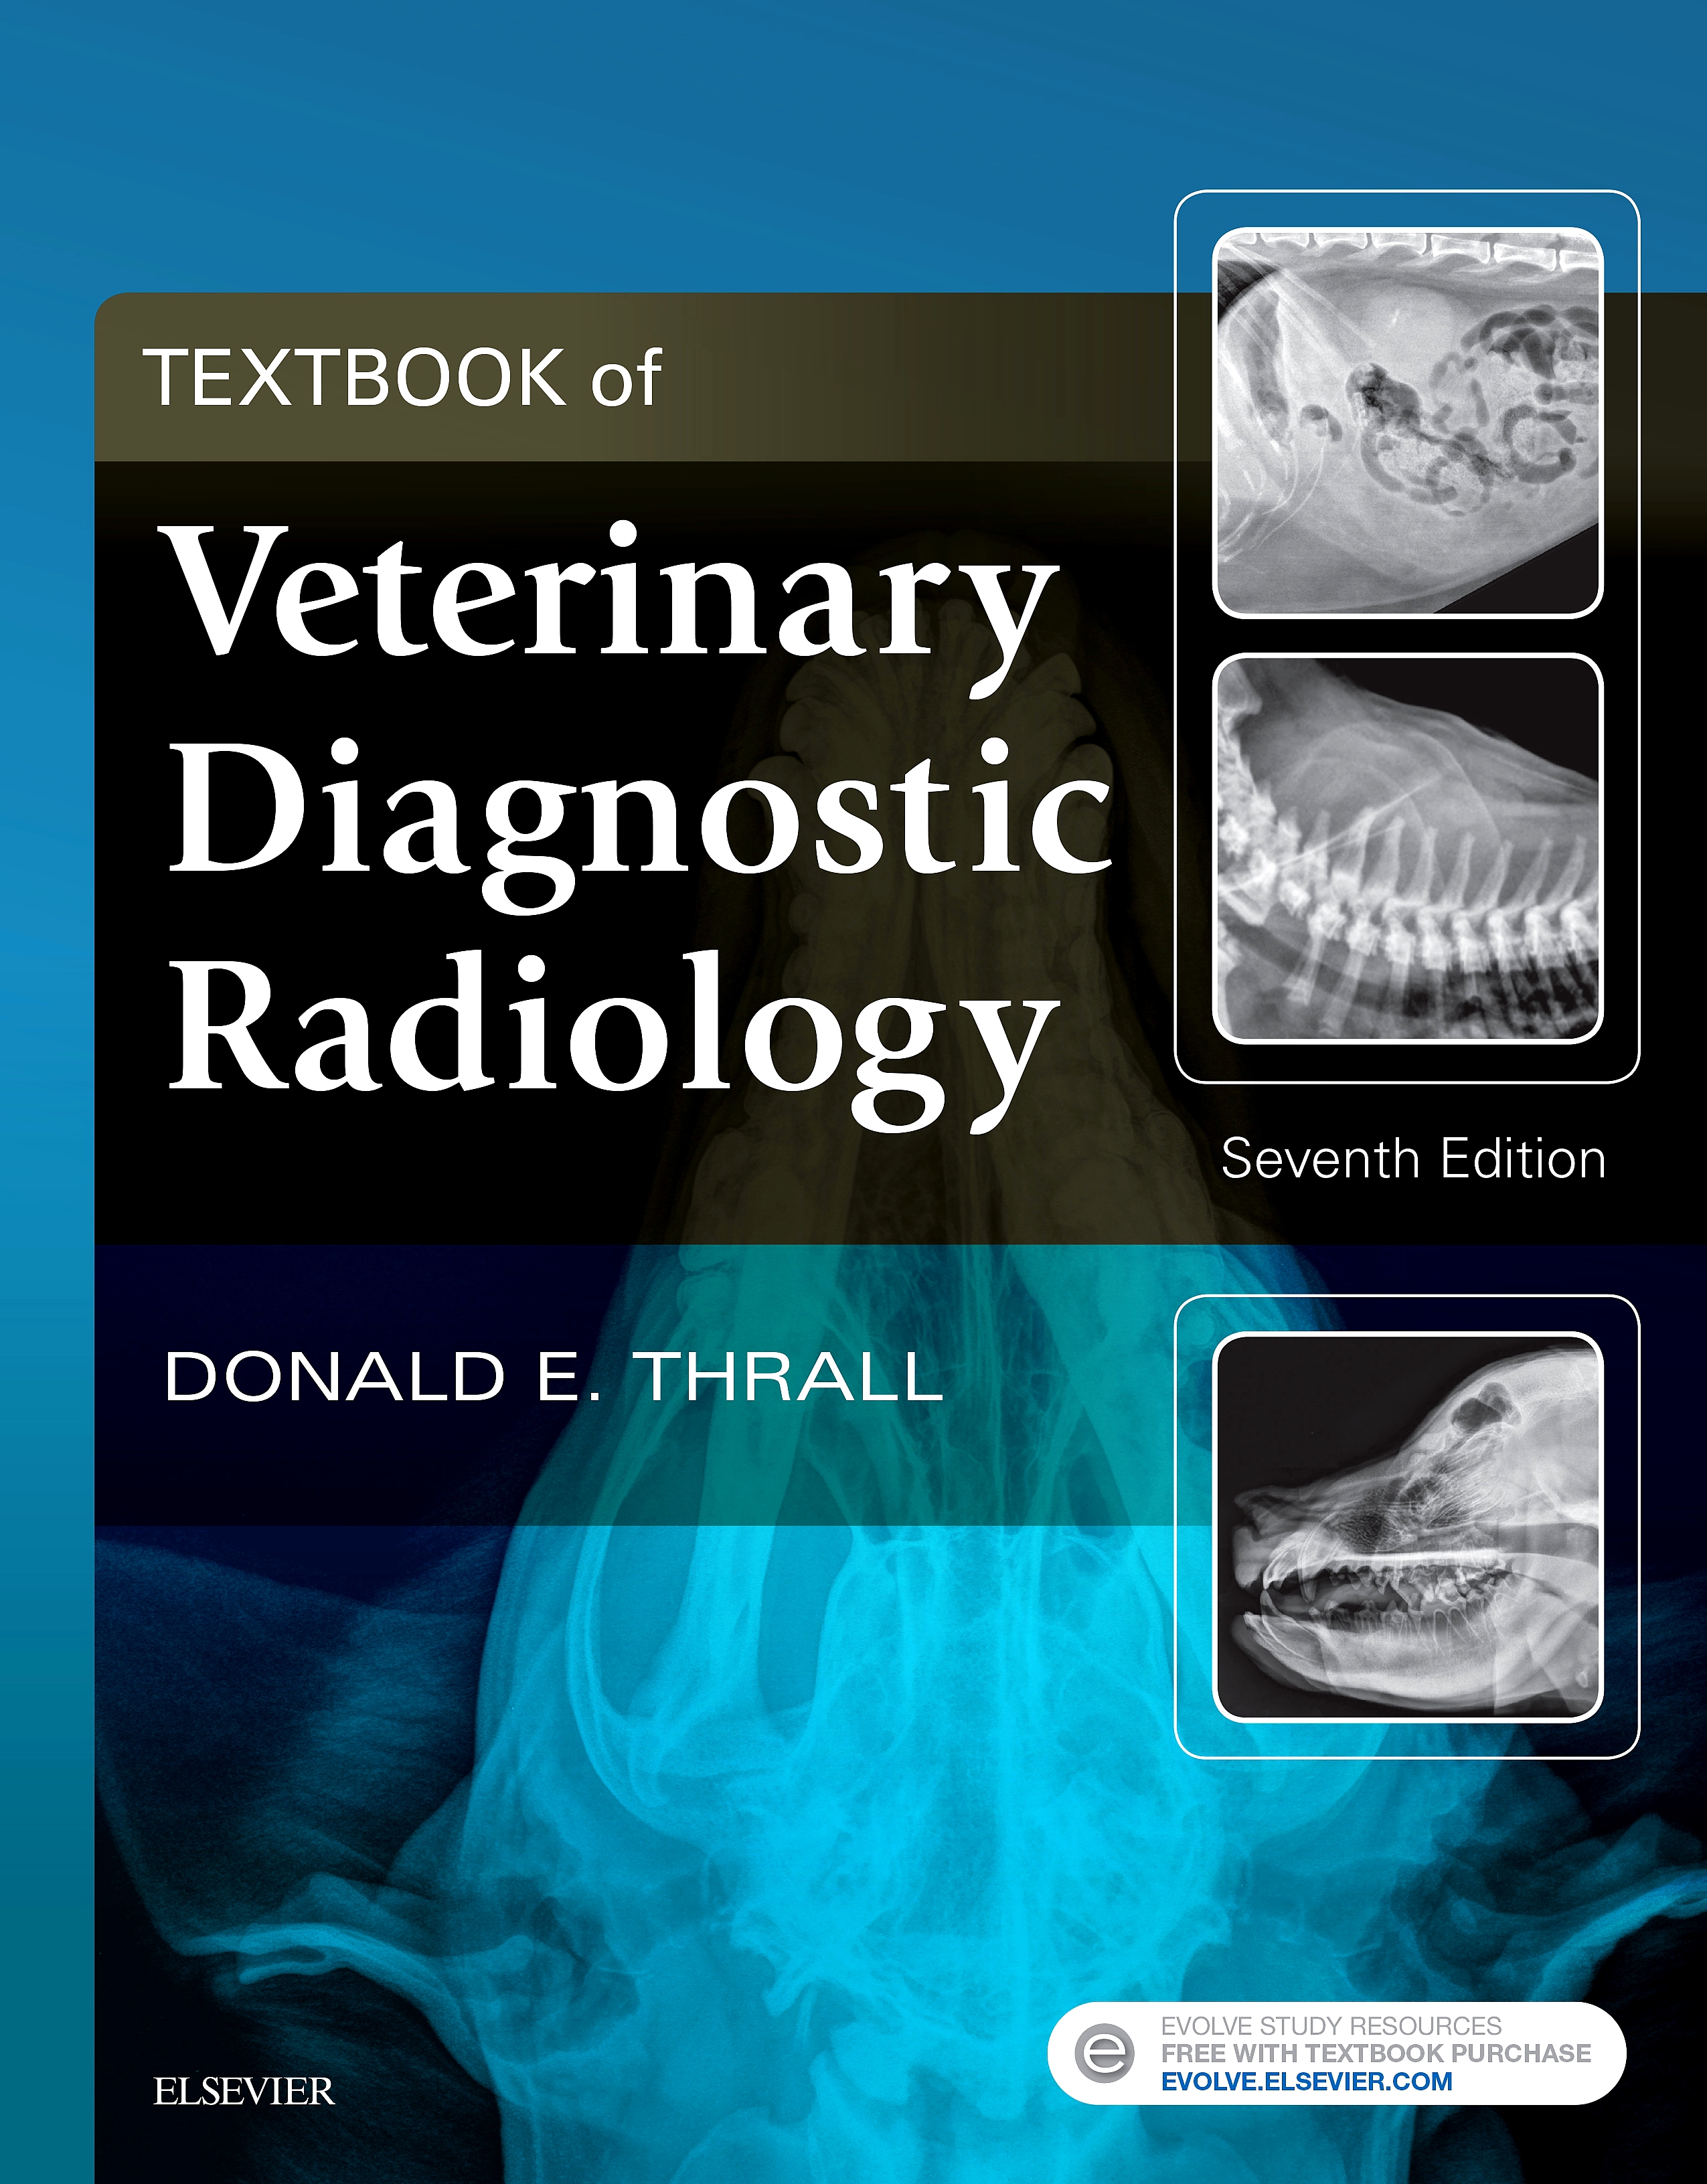 Evolve Resources for Textbook of Veterinary Diagnostic Radiology, 7th Edition